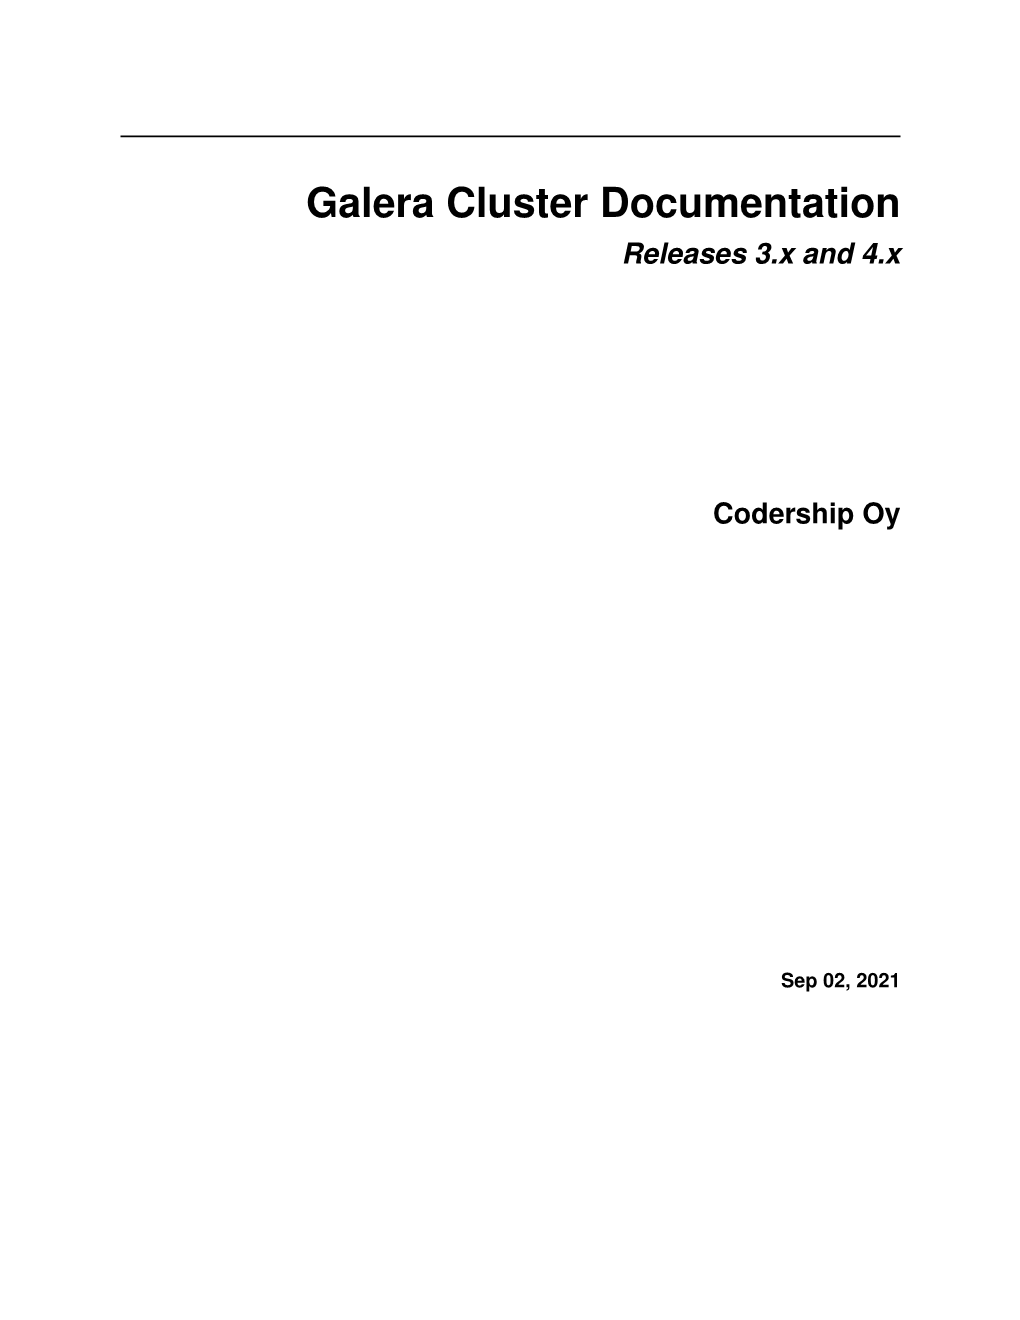 Galera Cluster Documentation Releases 3.X and 4.X Codership Oy